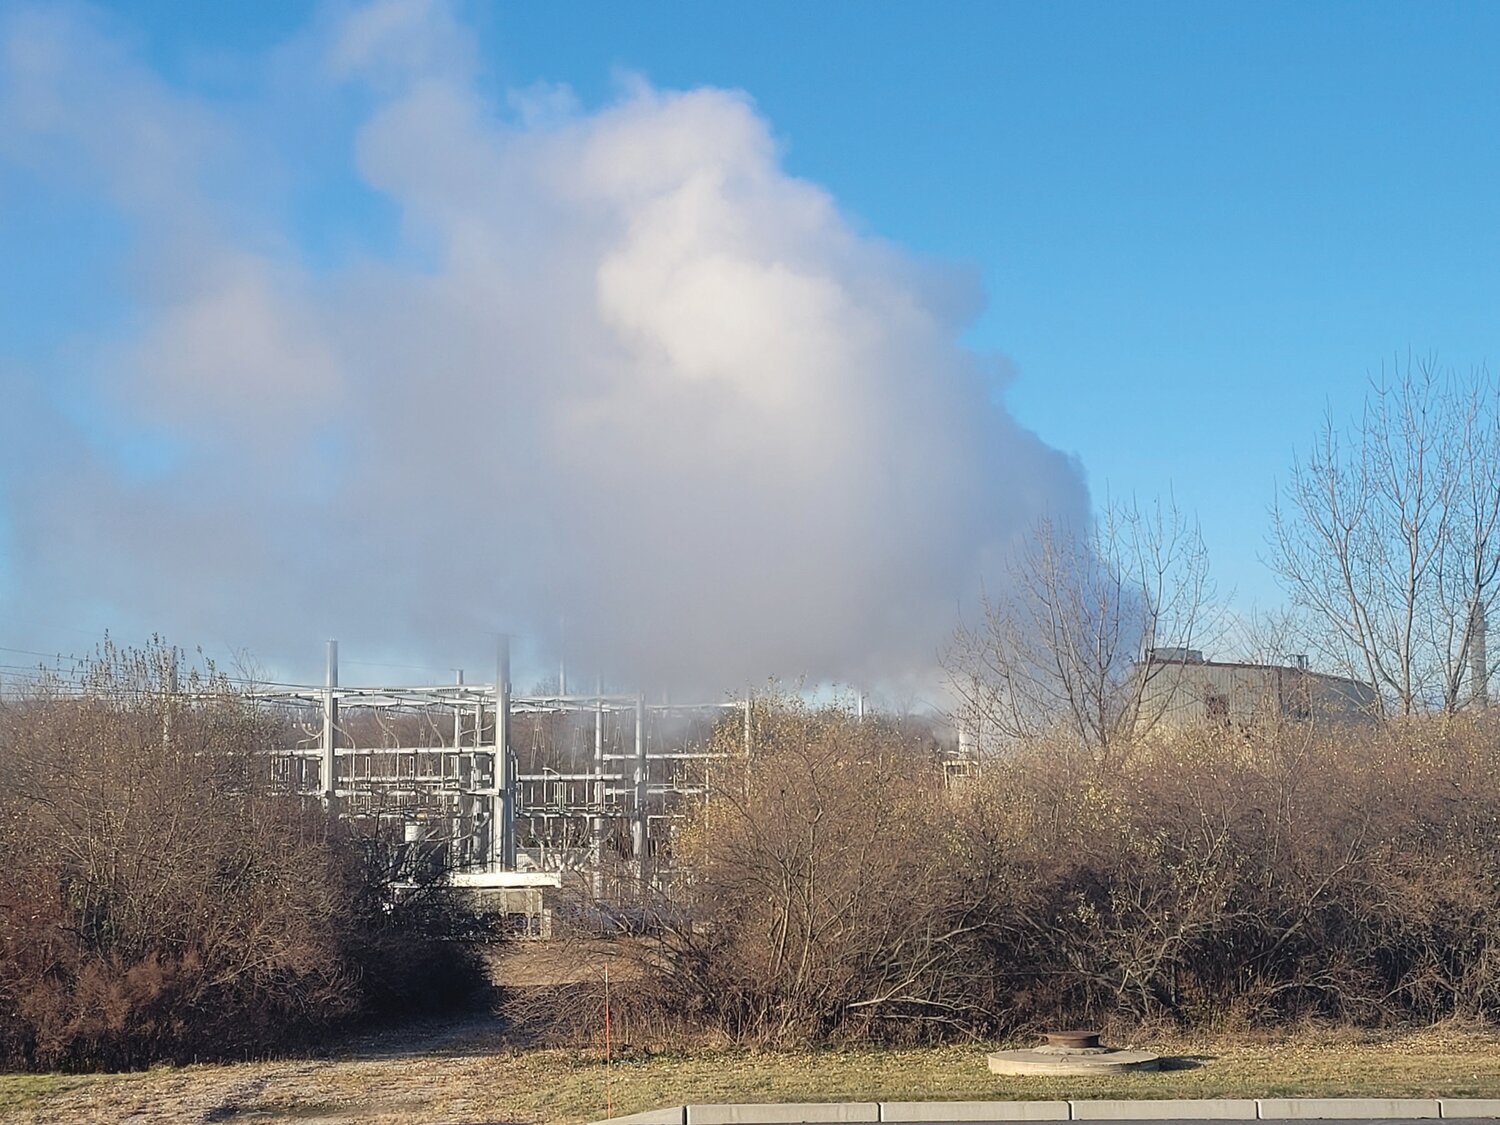 SMOKE STACKS: The view from directly outside the RIRRC headquarters on Shun Pike shows a beehive of activity. RIRRC runs the Ocean State’s lone operating Central Landfill. RIRRC oversees Rhode Island’s Materials Recycling Facility, Leaf and Yard Compost, and Eco-Depot.